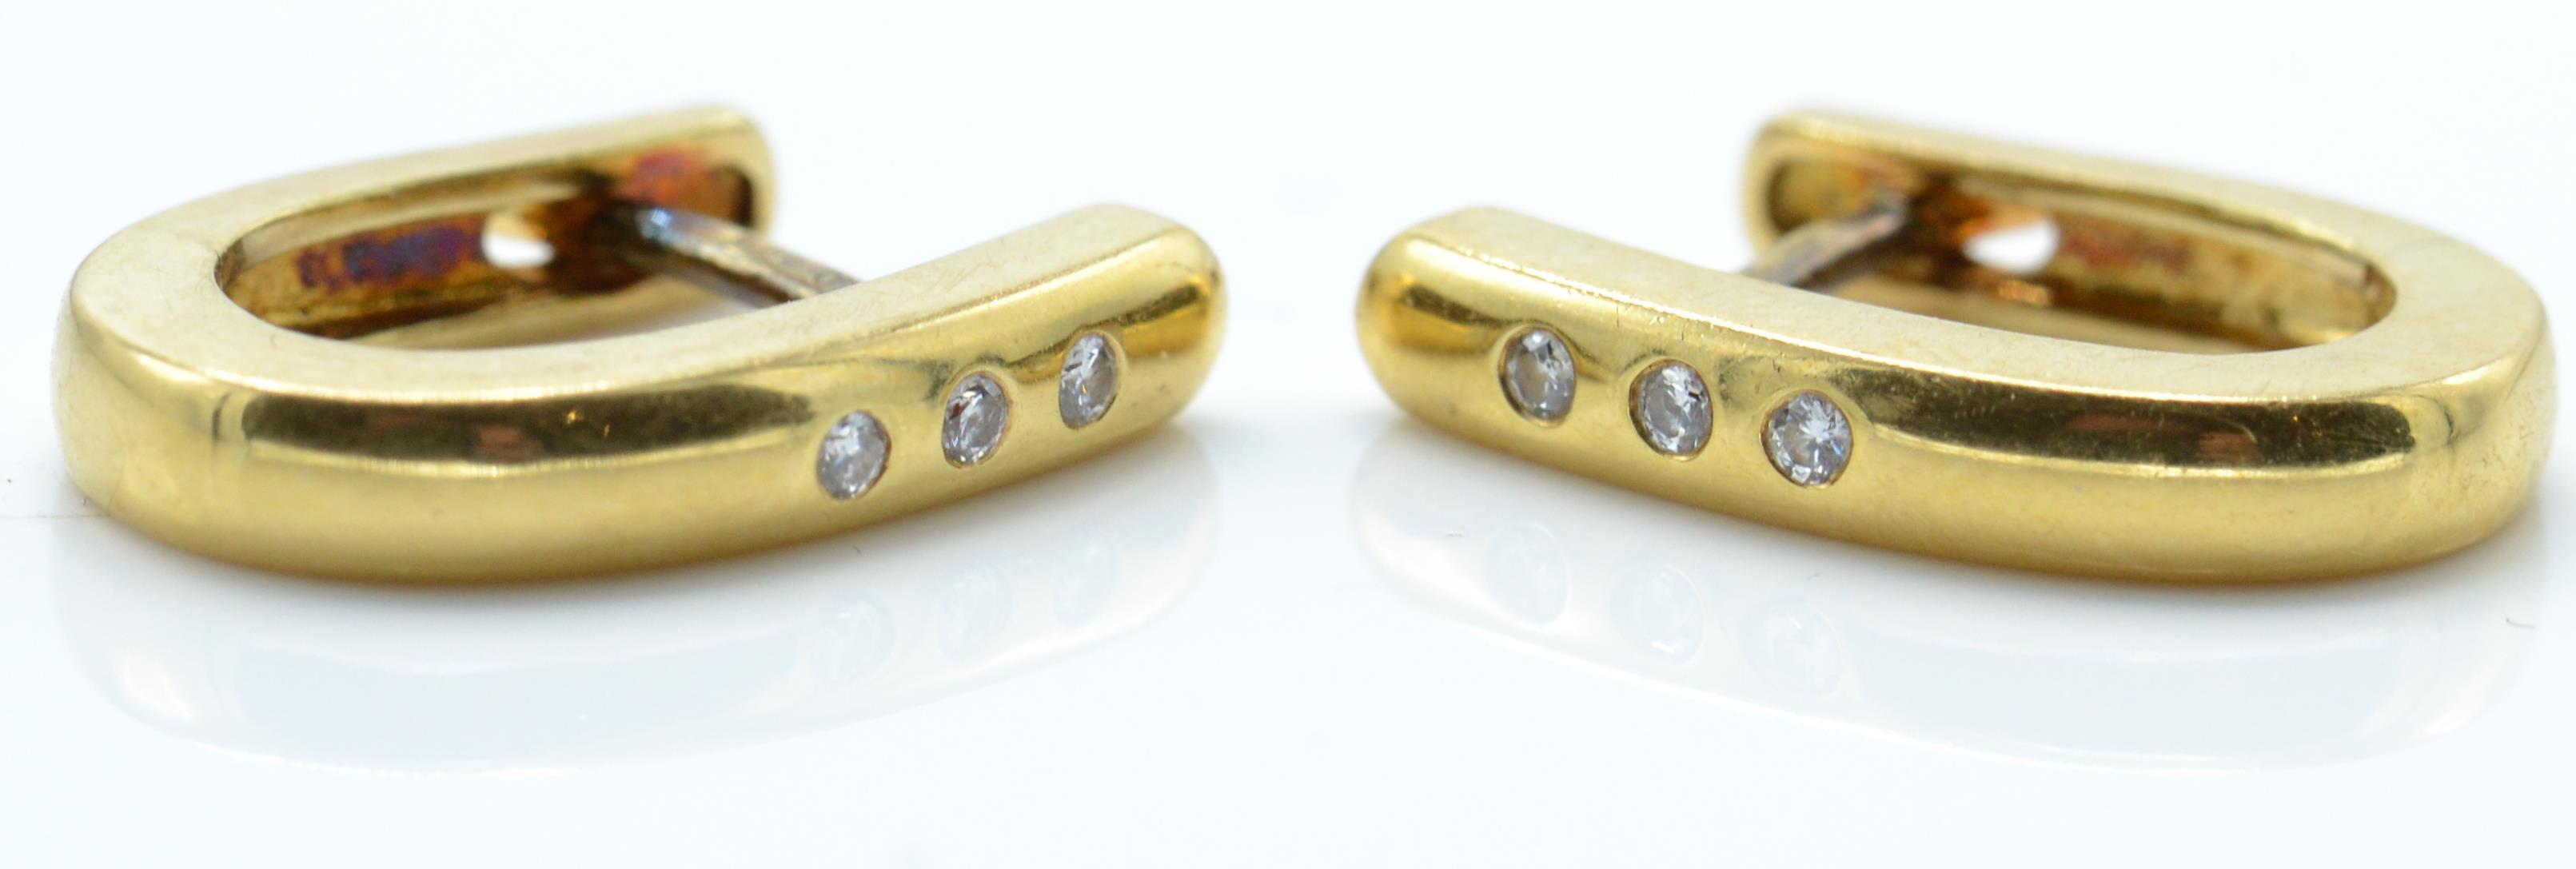 A pair of hallmarked 18ct gold and diamond earrings.